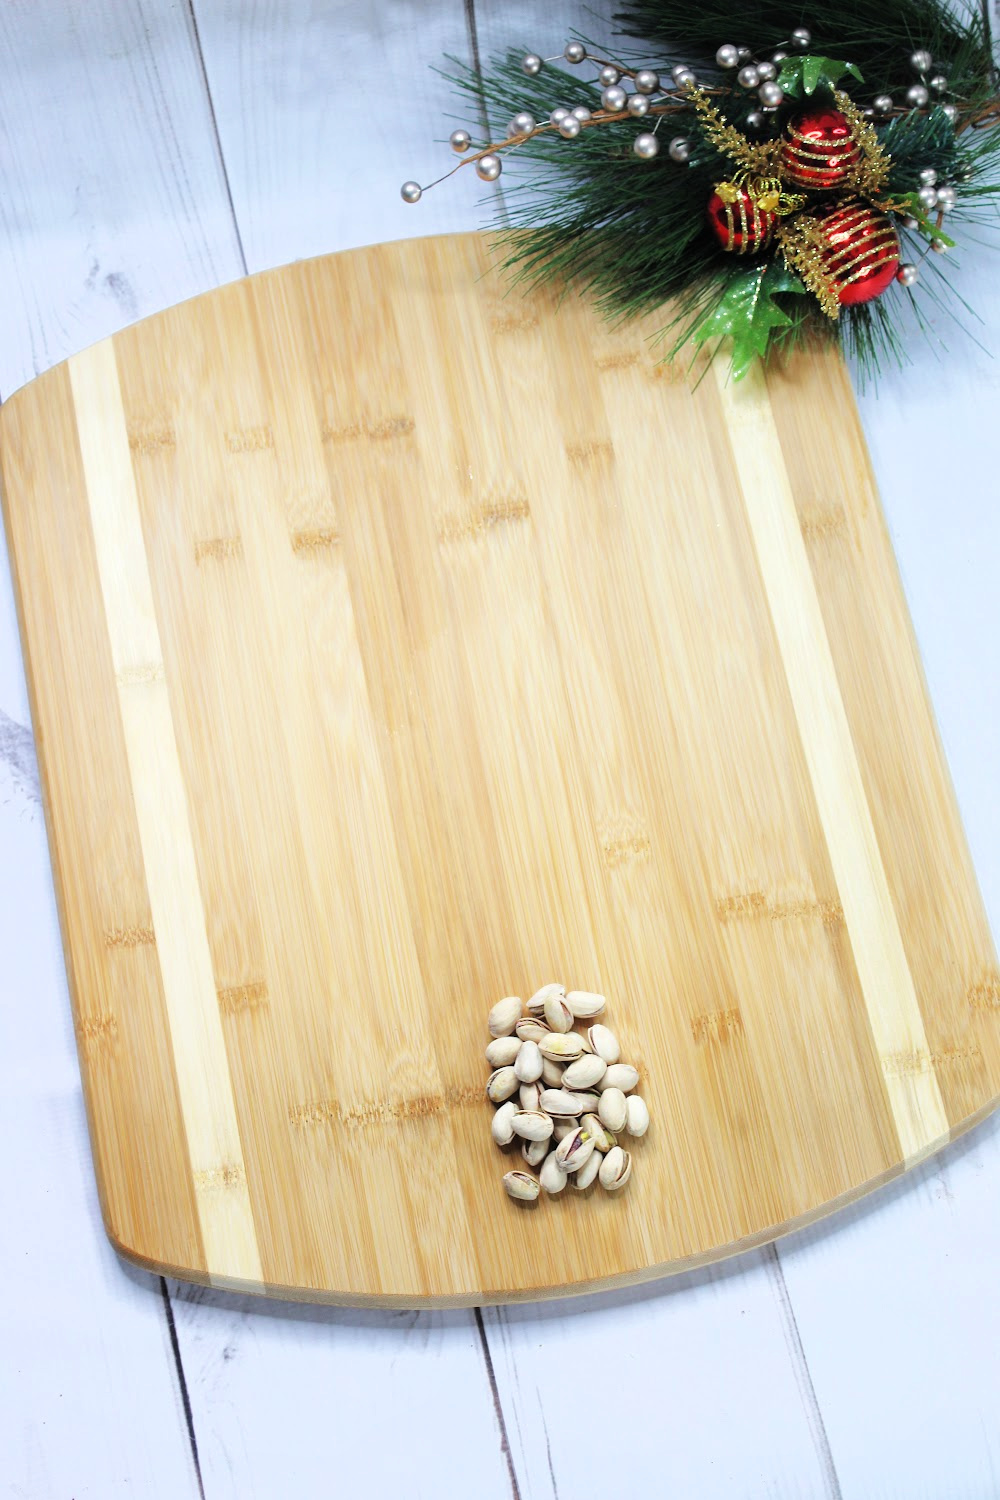 An empty charcuterie board using nuts as the trunk of a Christmas tree.